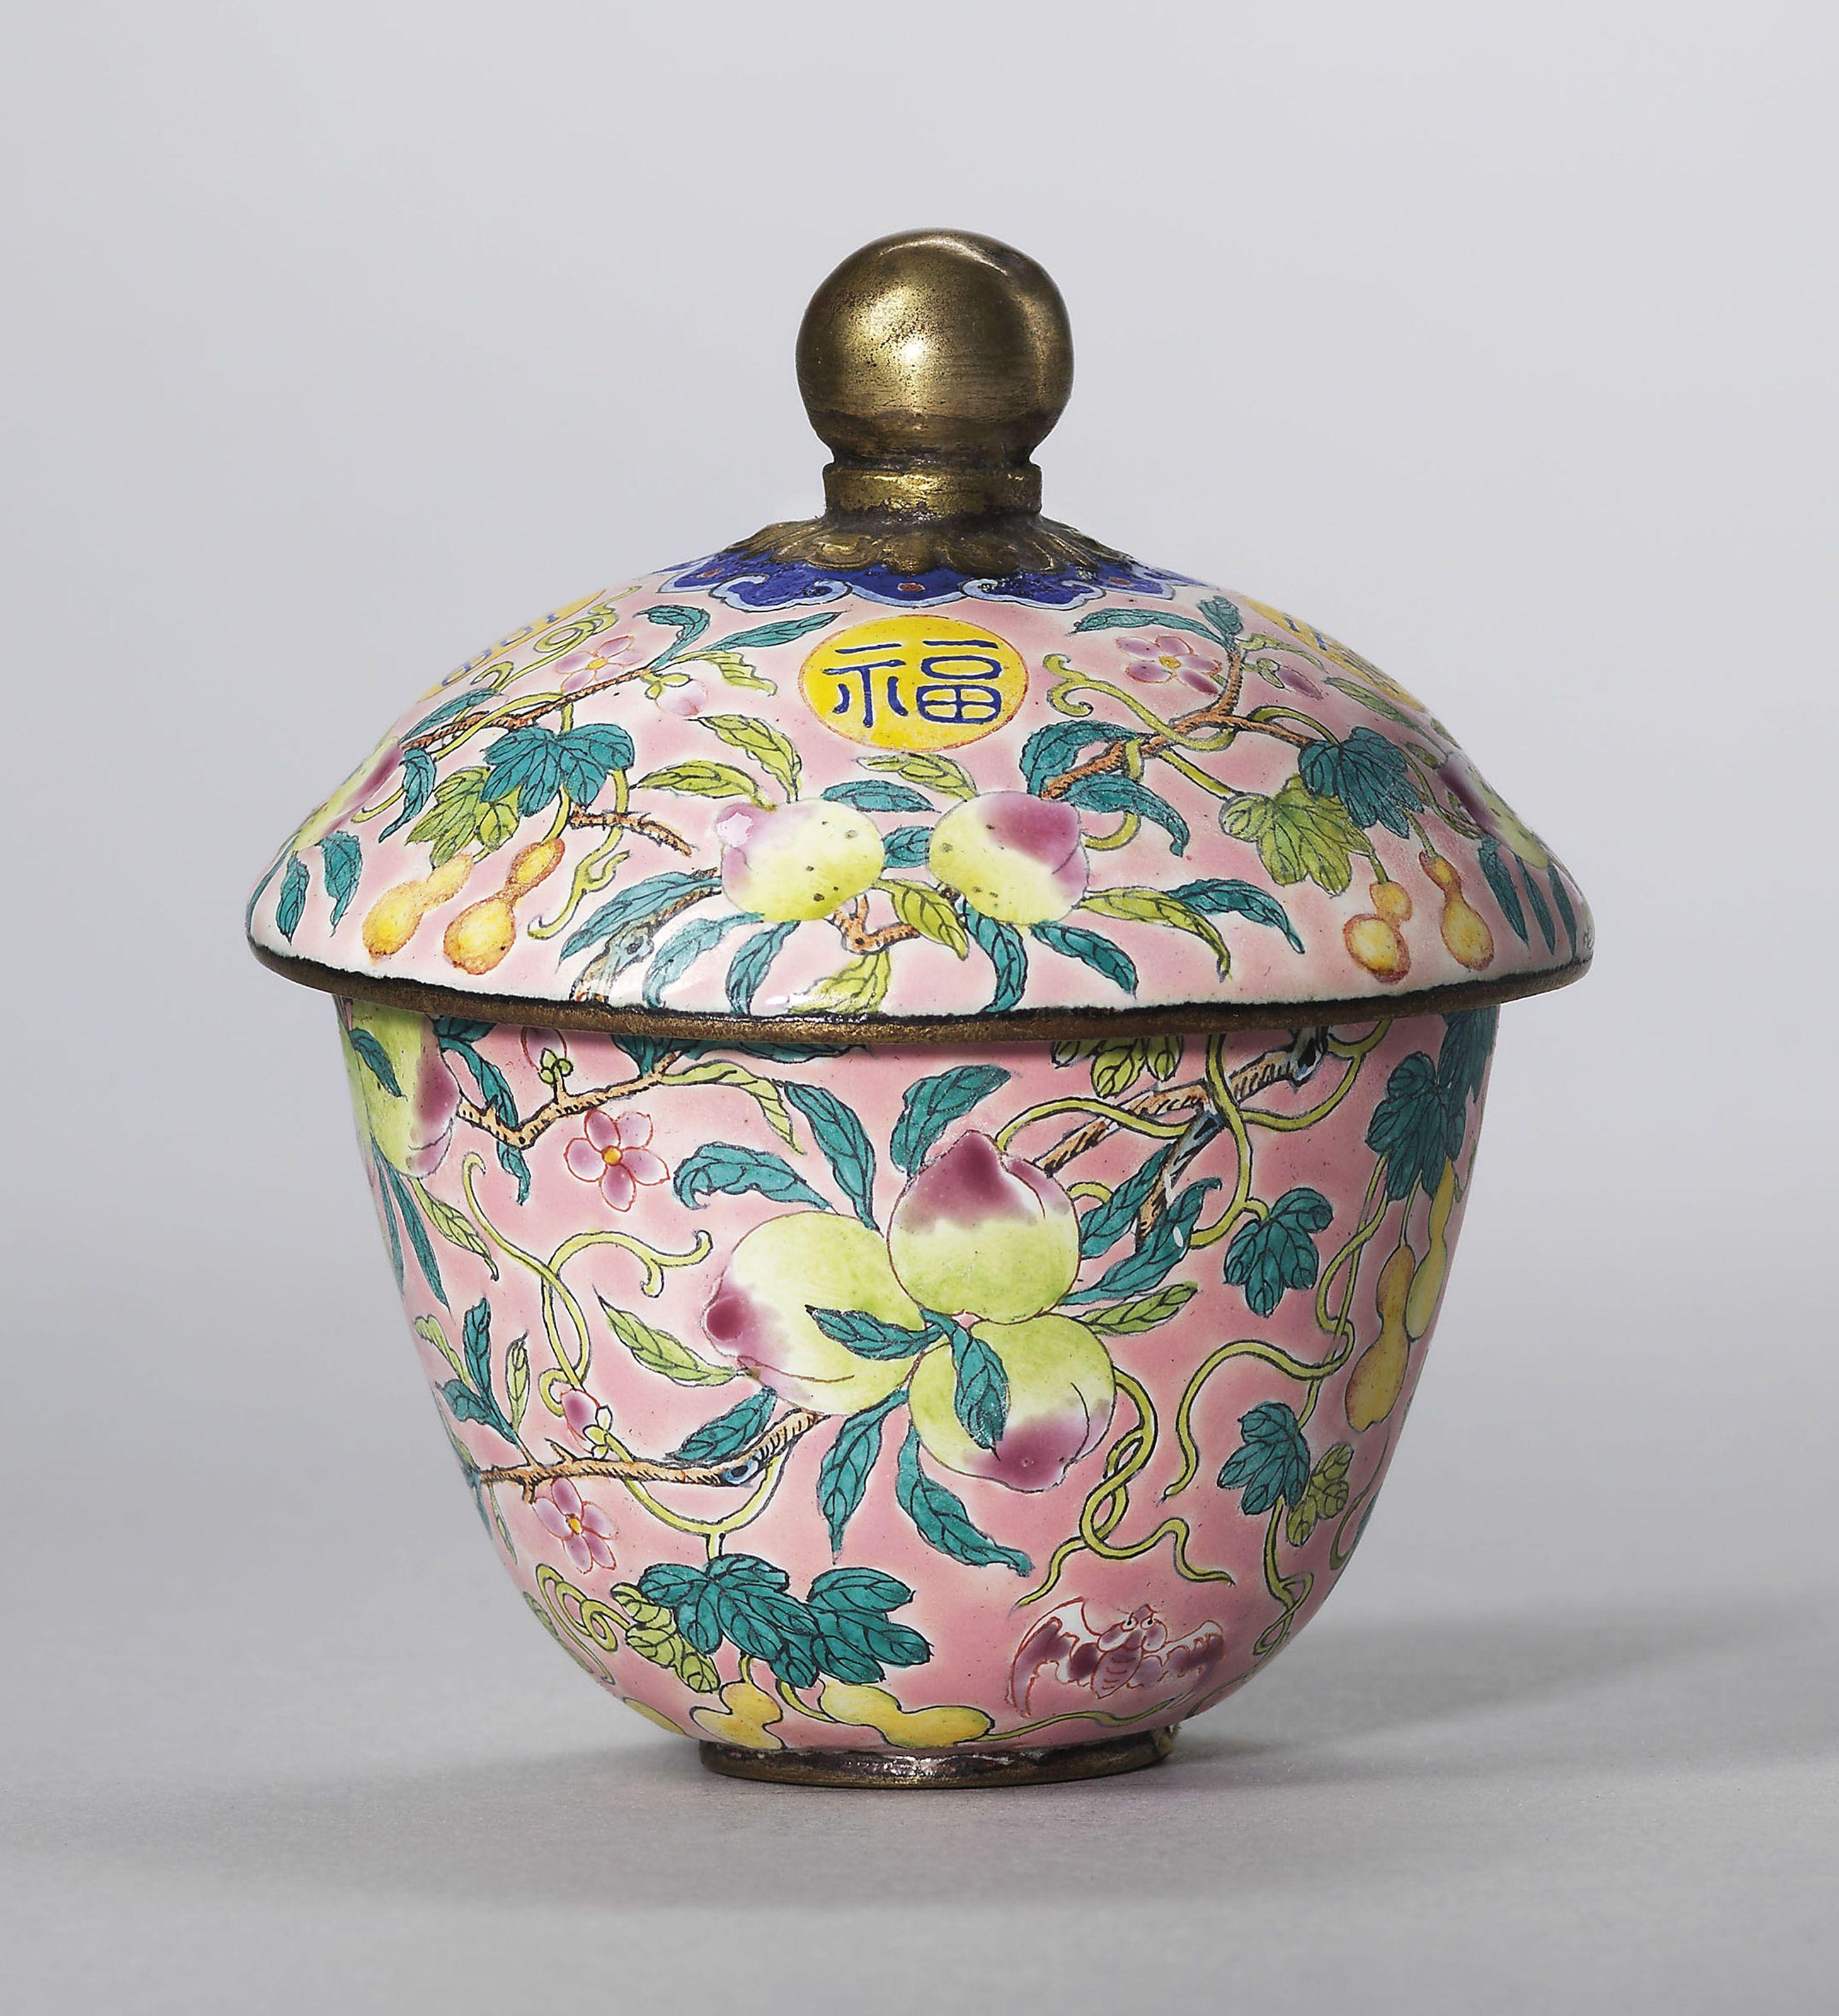 Yellow Flower Red Outline Company Logo - A guide to the symbolism of flowers on Chinese ceramics | Christie's